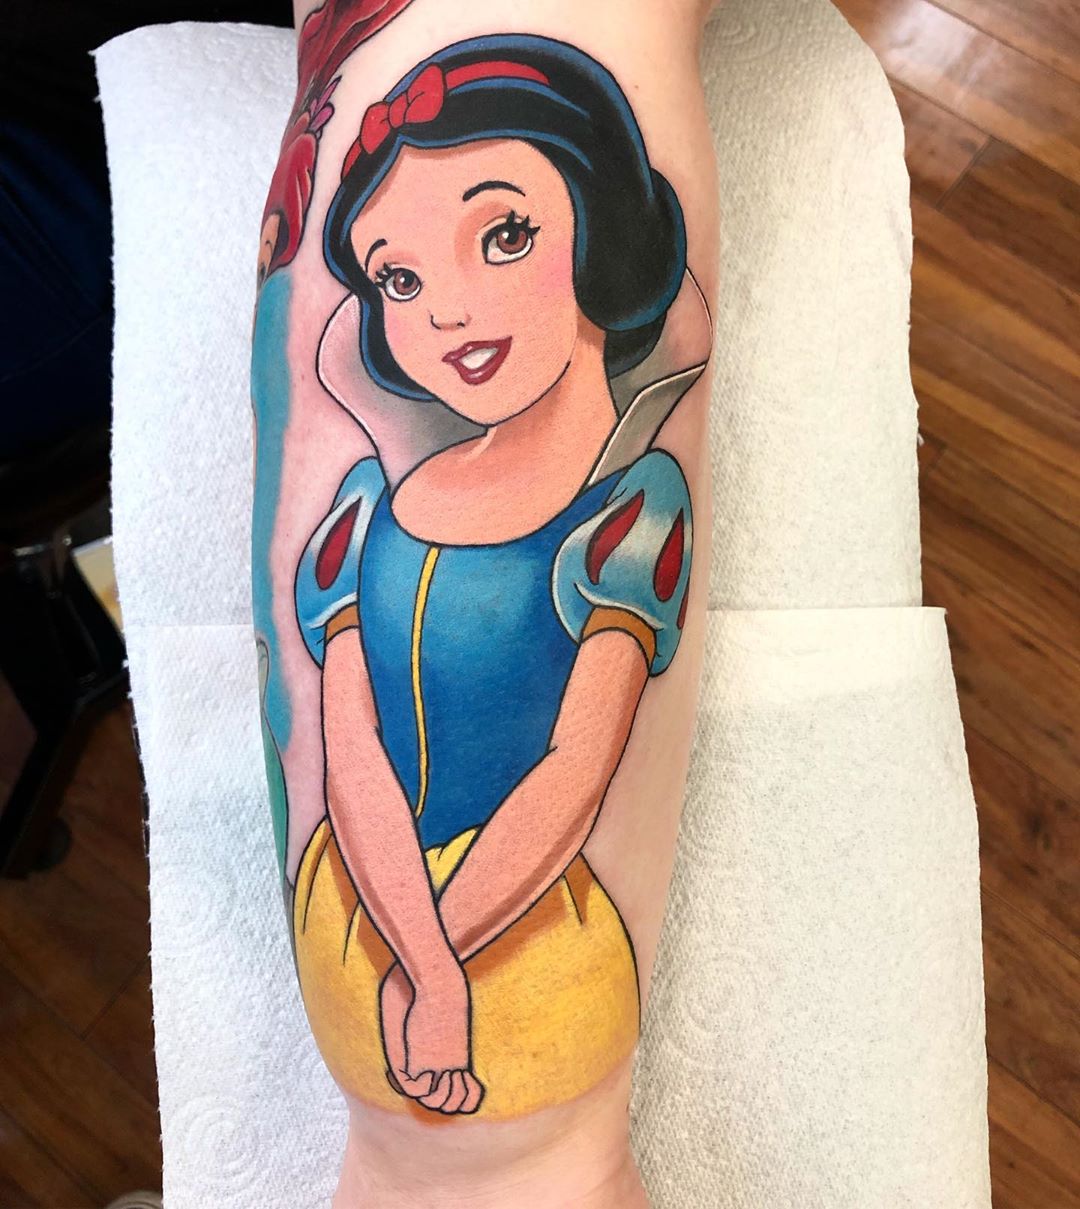 Disneys Snow White 10 Evil Queen Tattoos That Prove She Was The Fairest  Of Them All